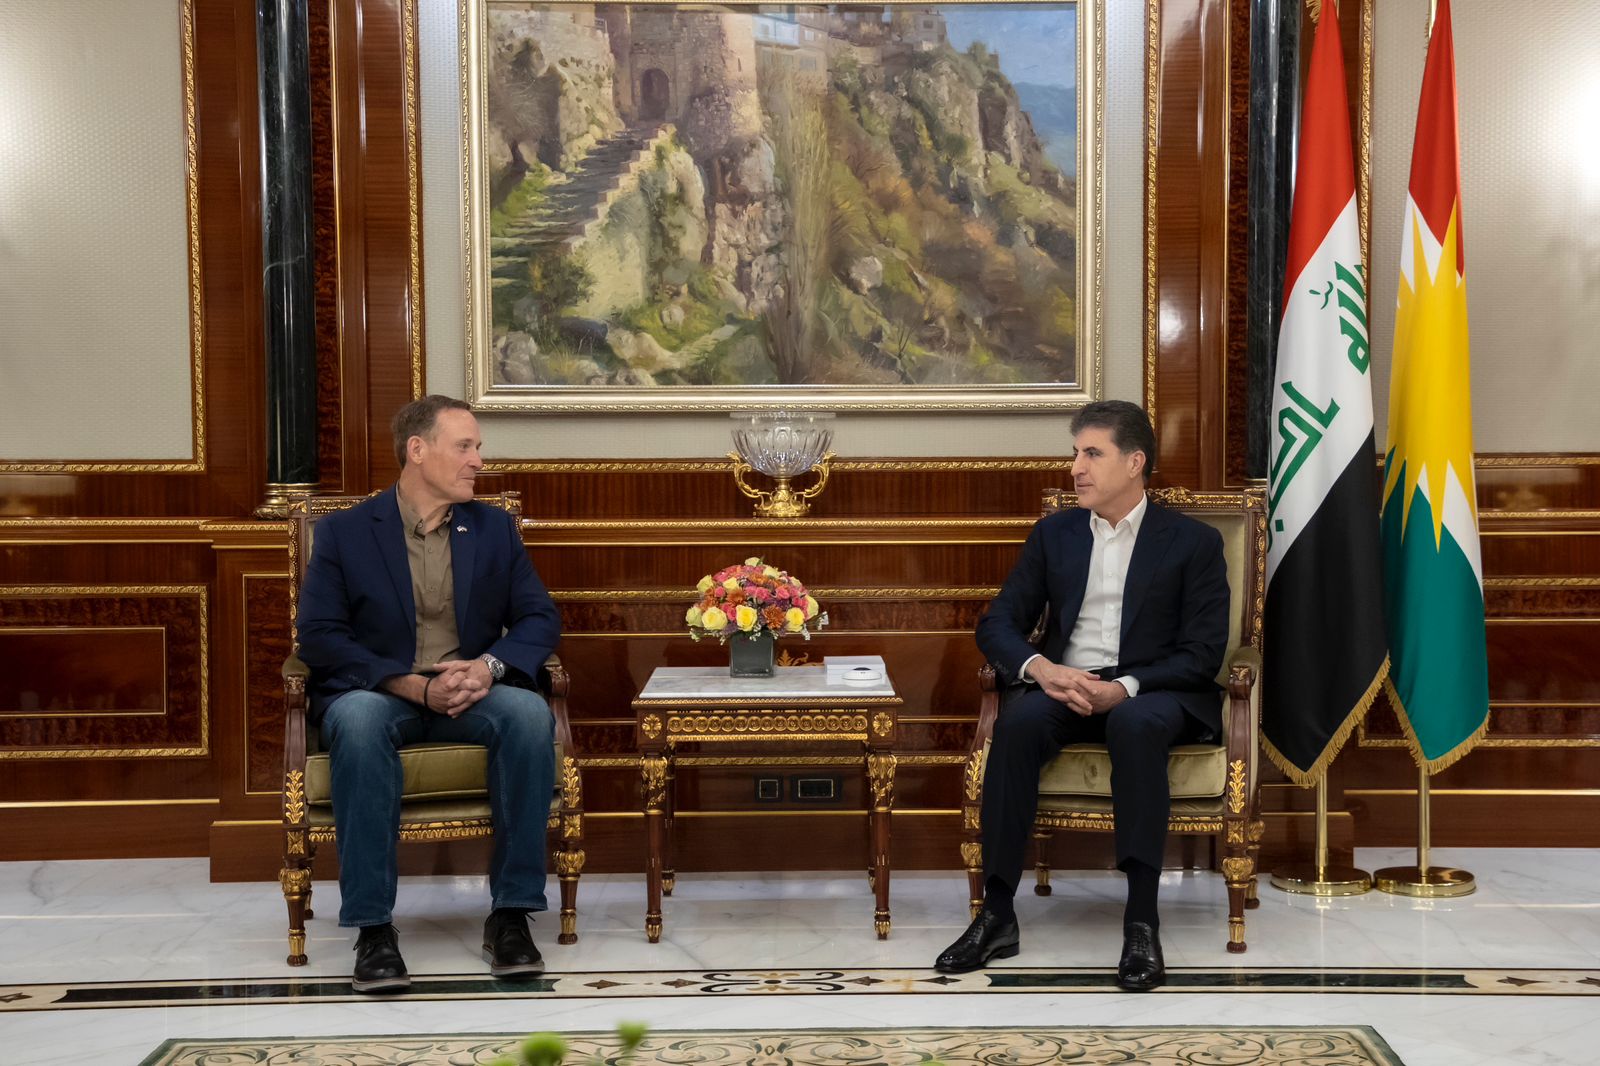 Deputy PM and US Central Command discuss improving Iraqi security forces